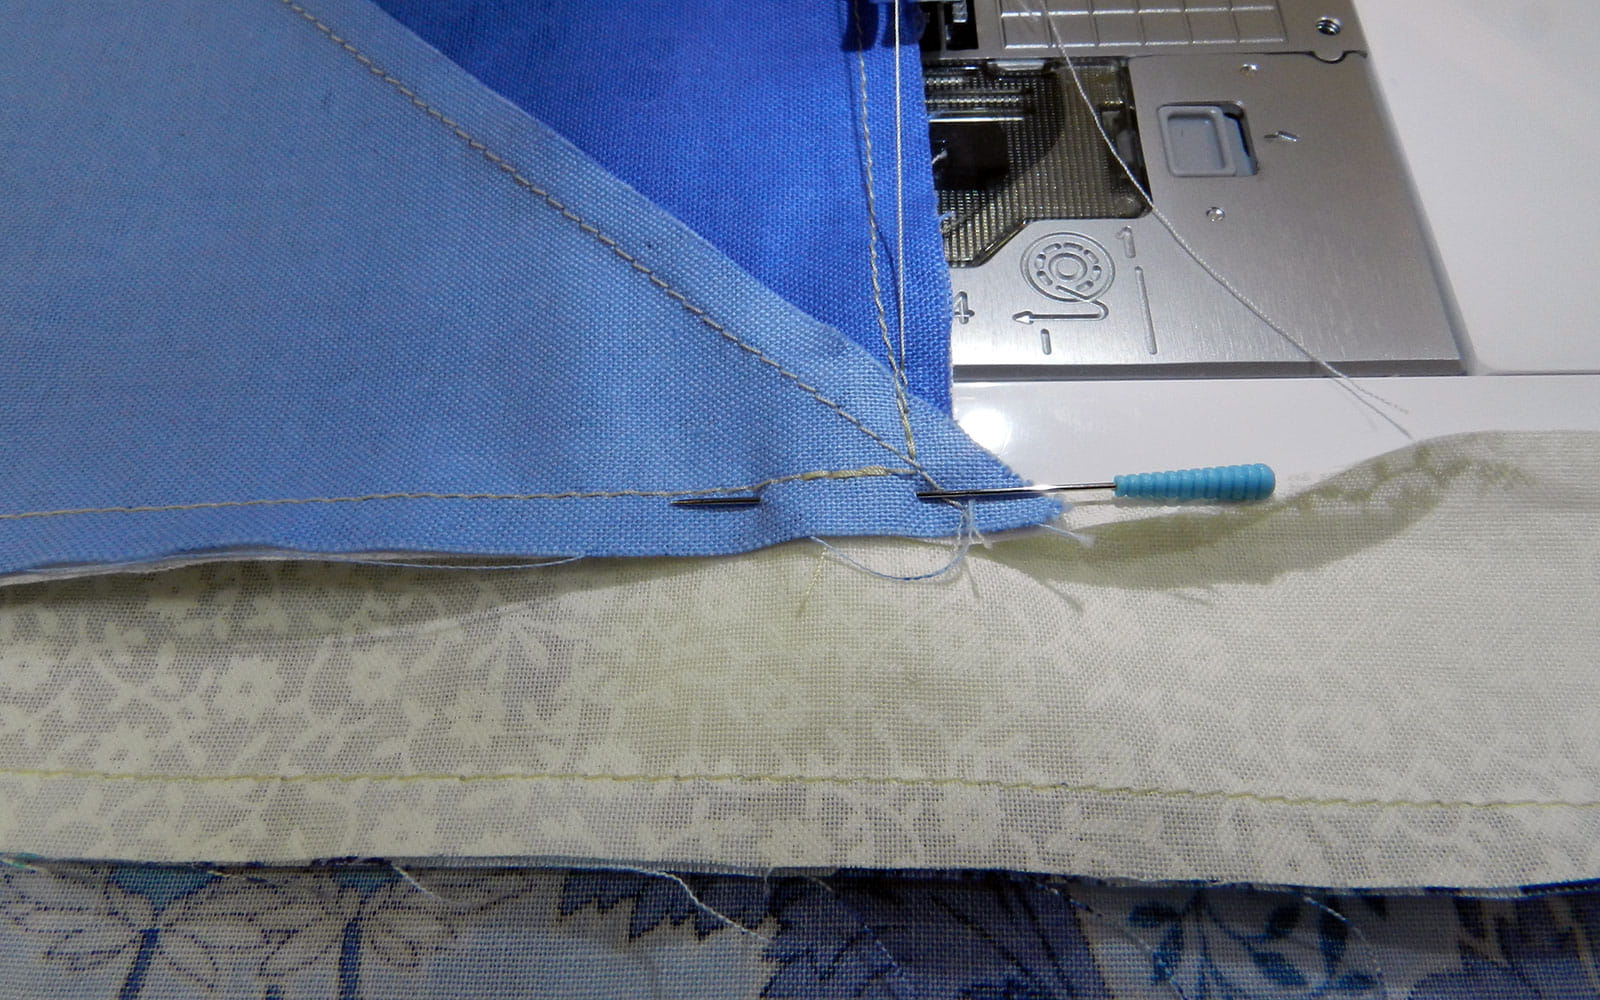 quilt corner with needle on sewing machine